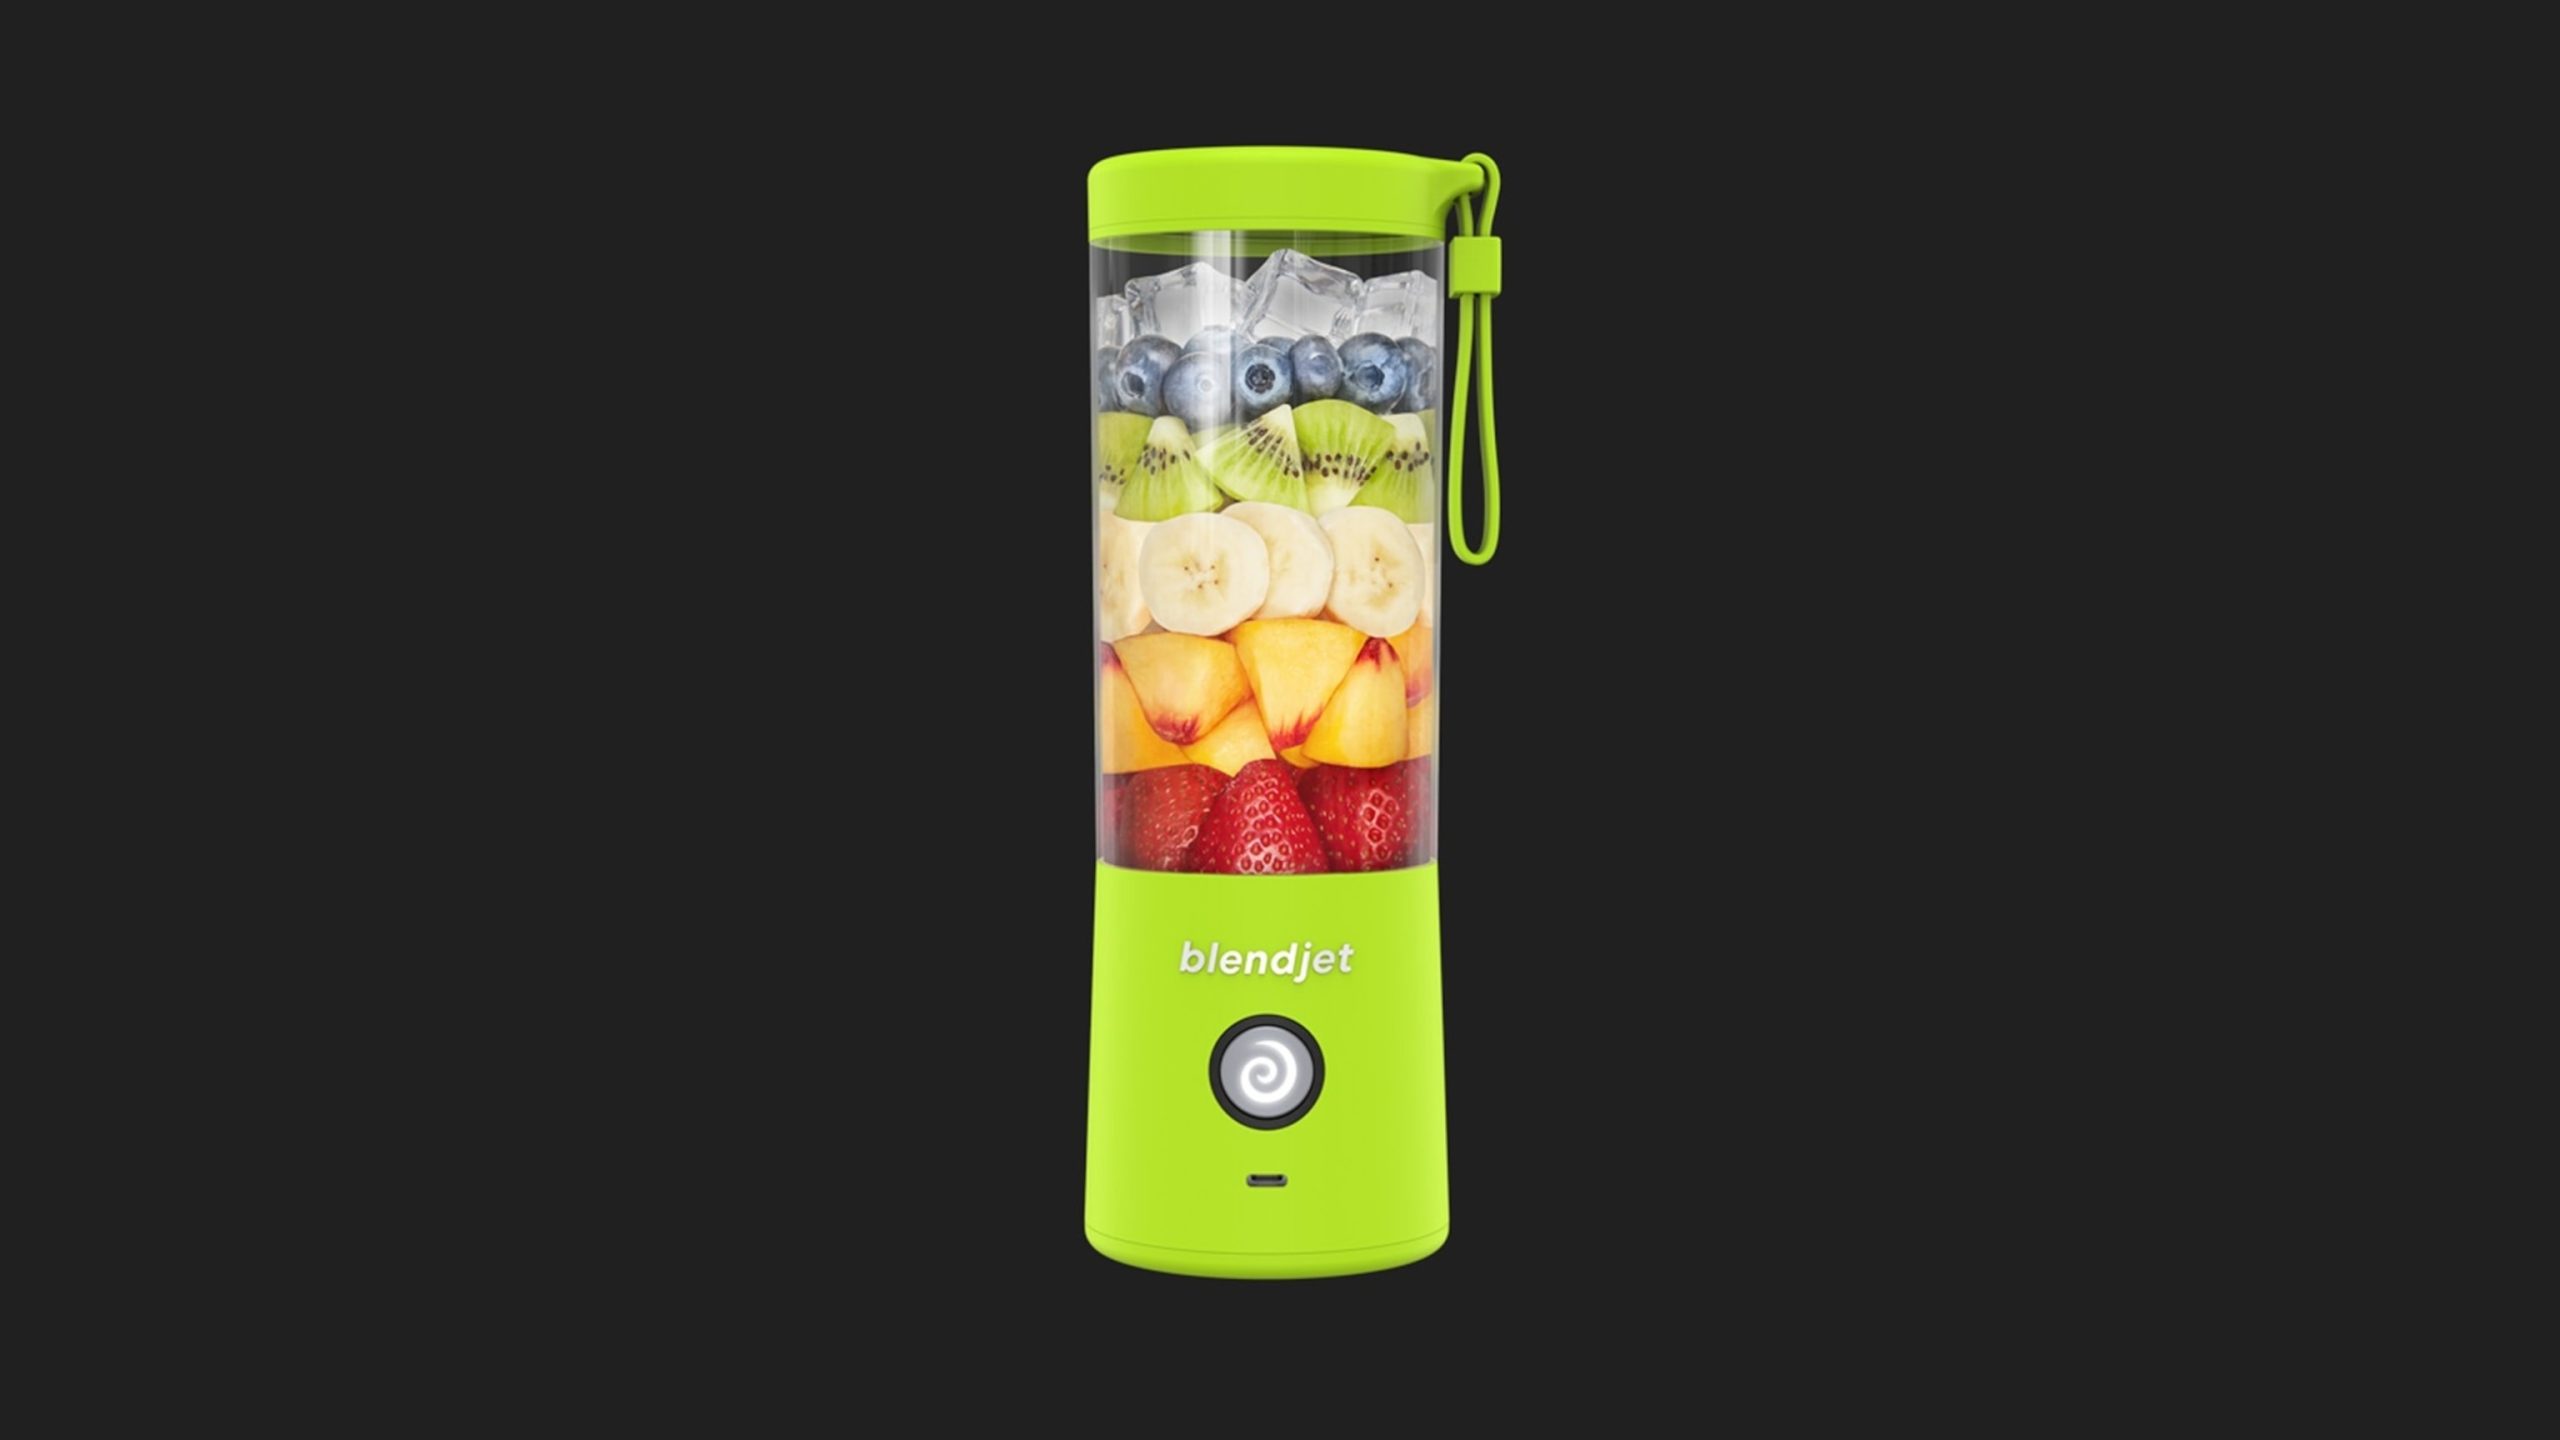 Recall Alert: More than 4 Million Portable Blenders Recalled for Fire and Laceration Hazards